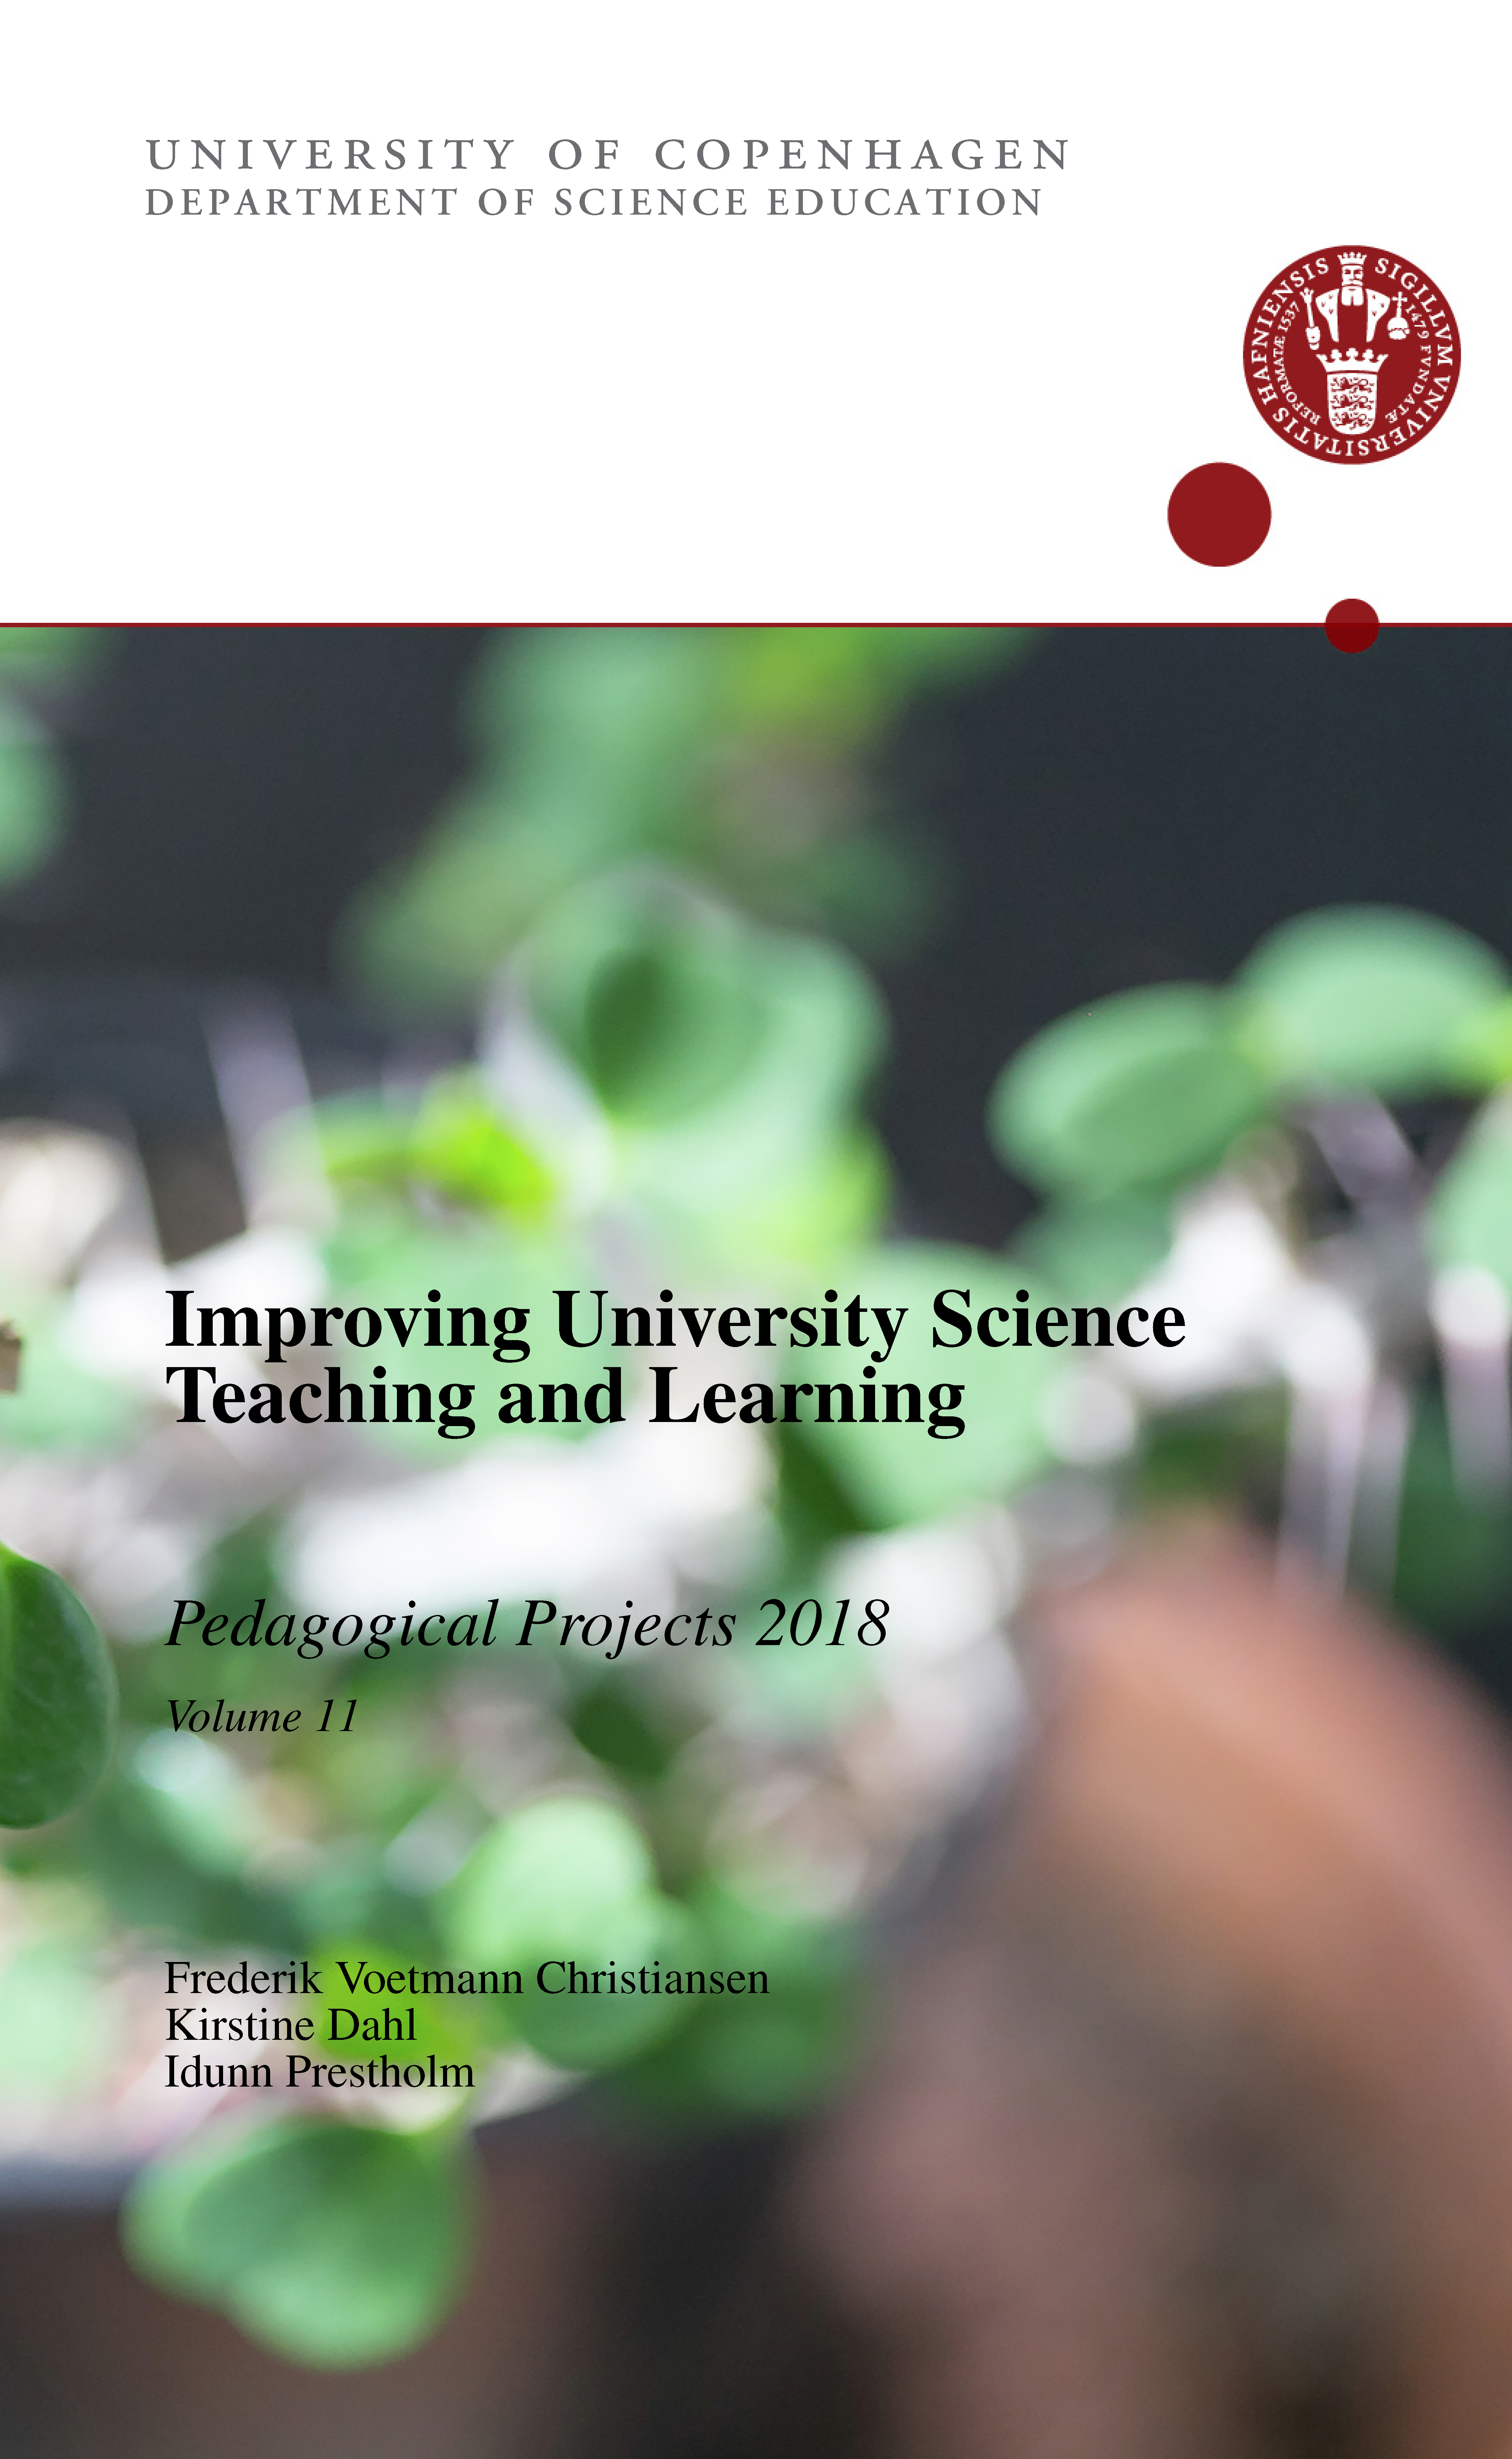 					Se Årg. 11 Nr. 1 (2018):  Improving University Science Teaching and Learning - Pedagogical Projects 2018
				